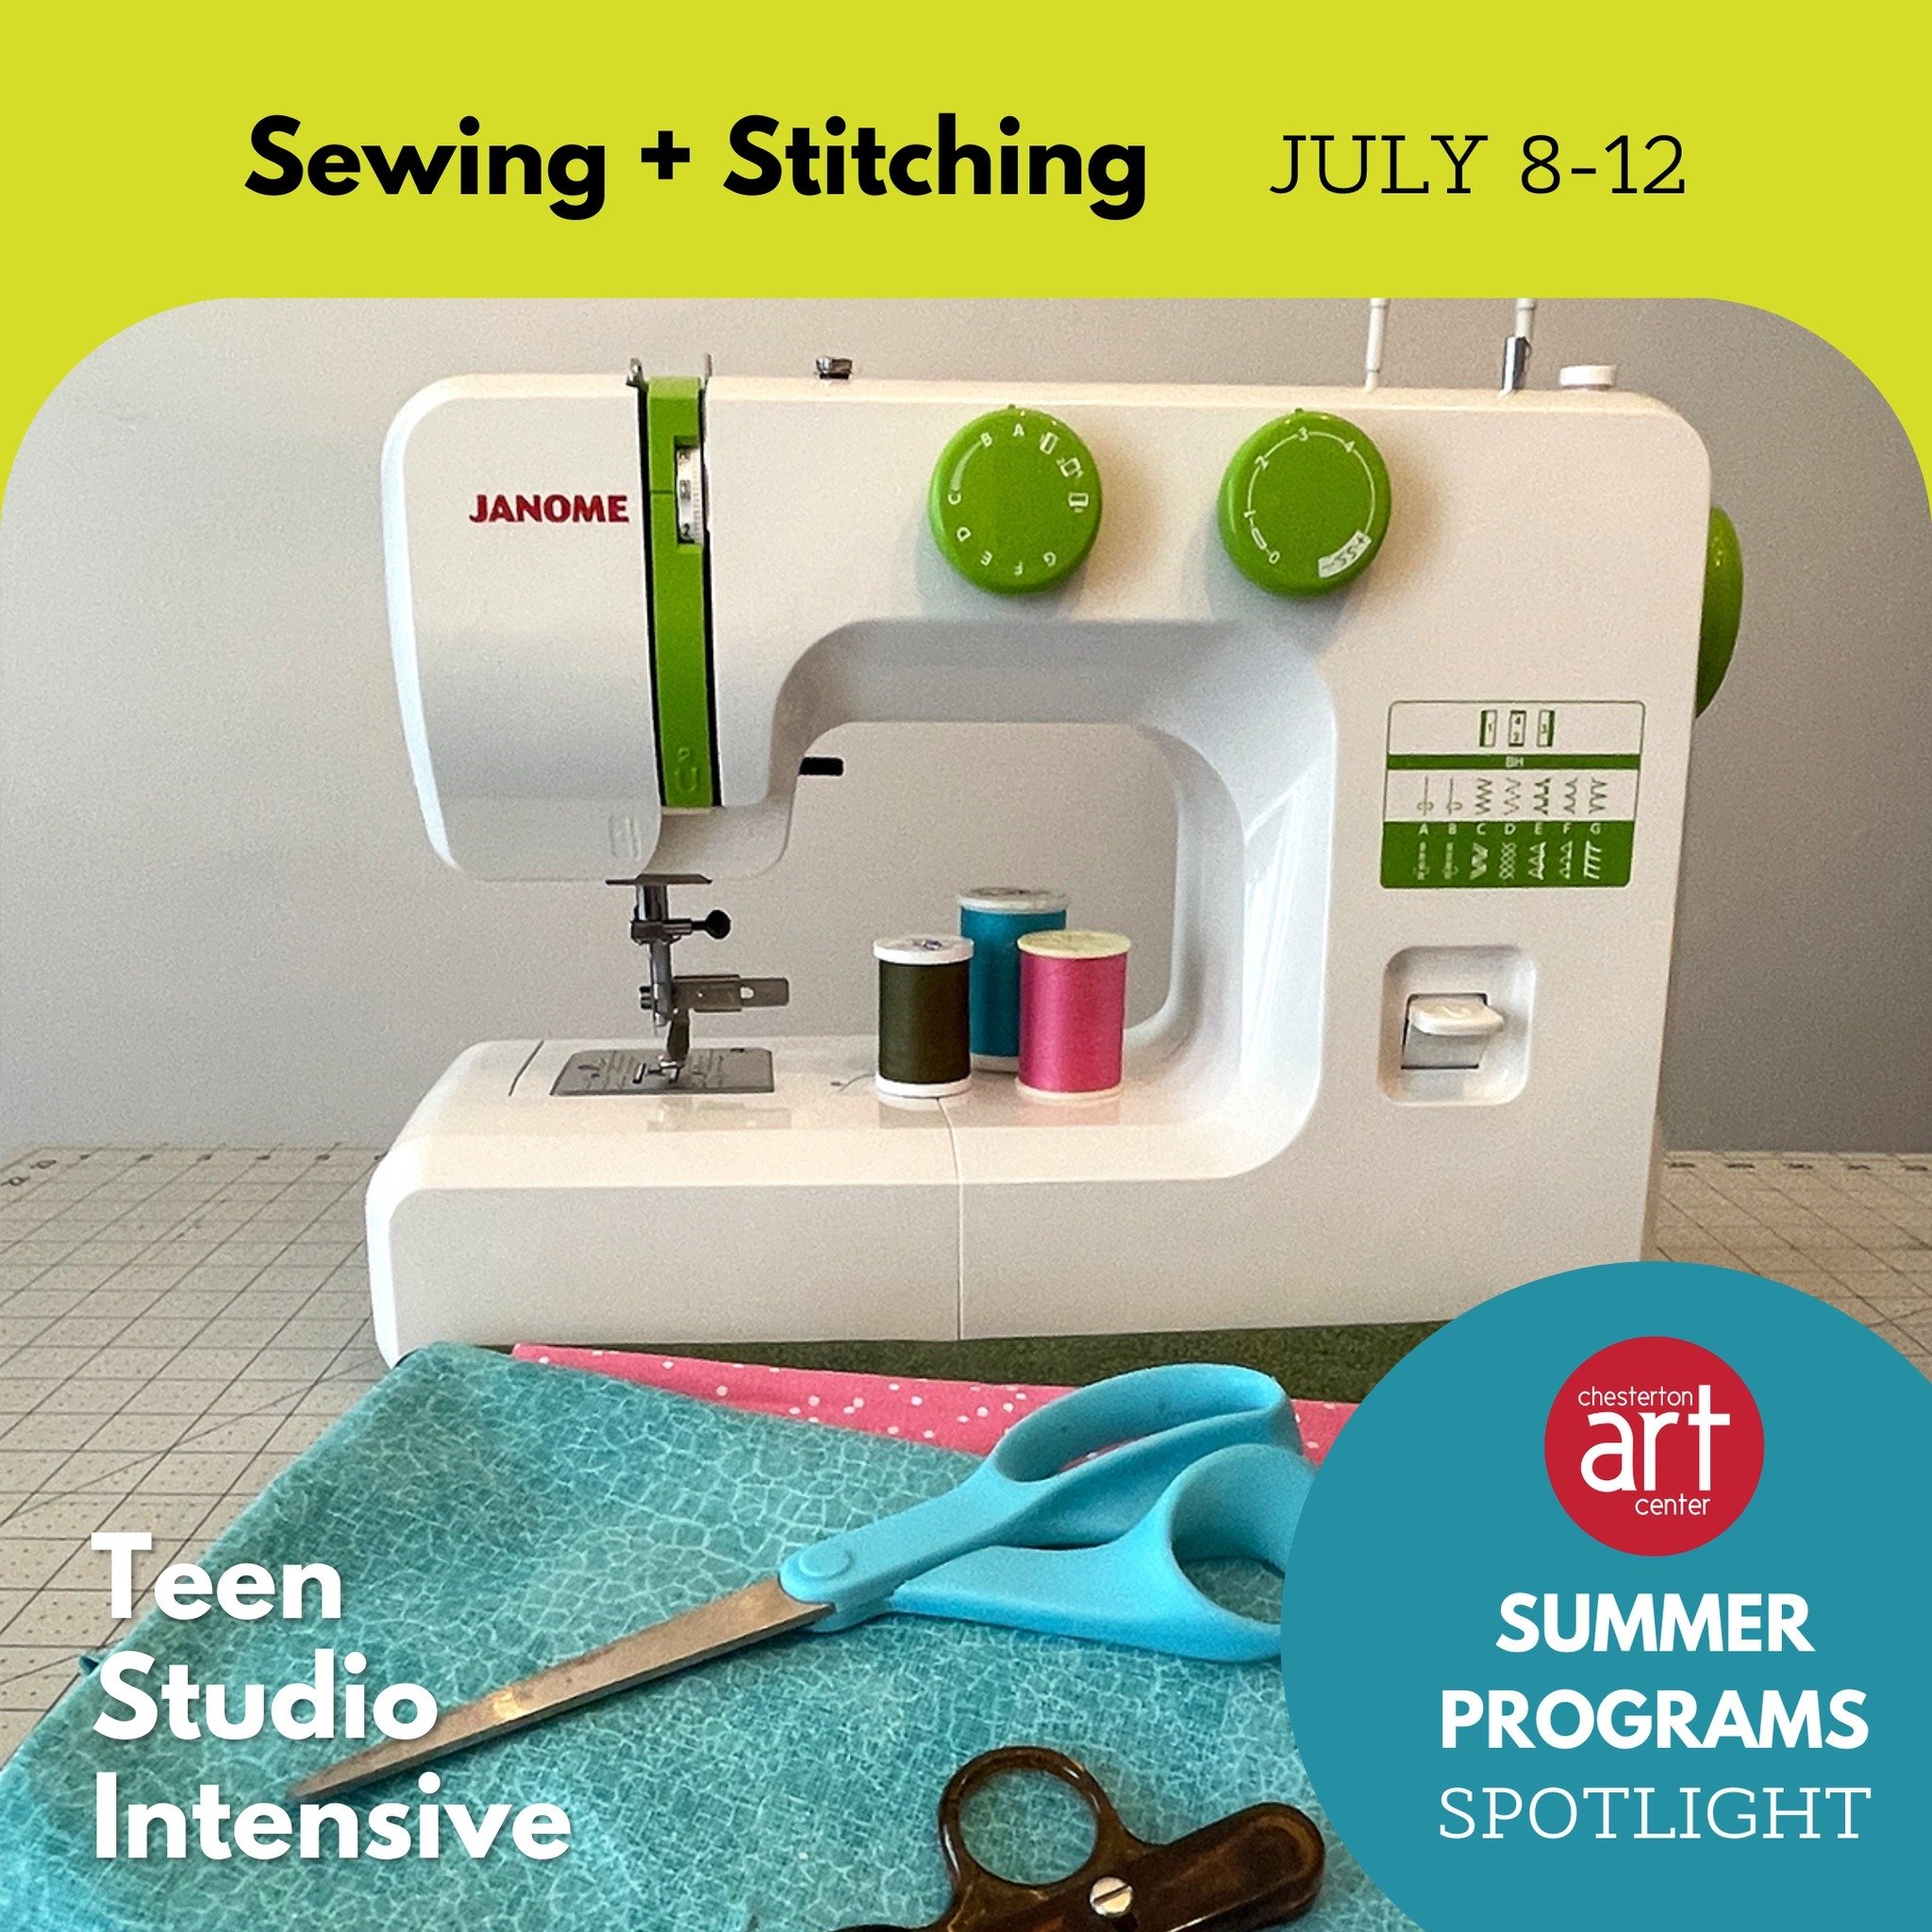 NEW to our 2024 Summer Programming are Teen Studio Intensives! This week's spotlight is the Sewing + Stitching Teen Studio Intensive, perfect for fashion-enthused teens who are looking to learn to sew.

🟢 Teen Studio Intensive: Sewing + Stitching / 